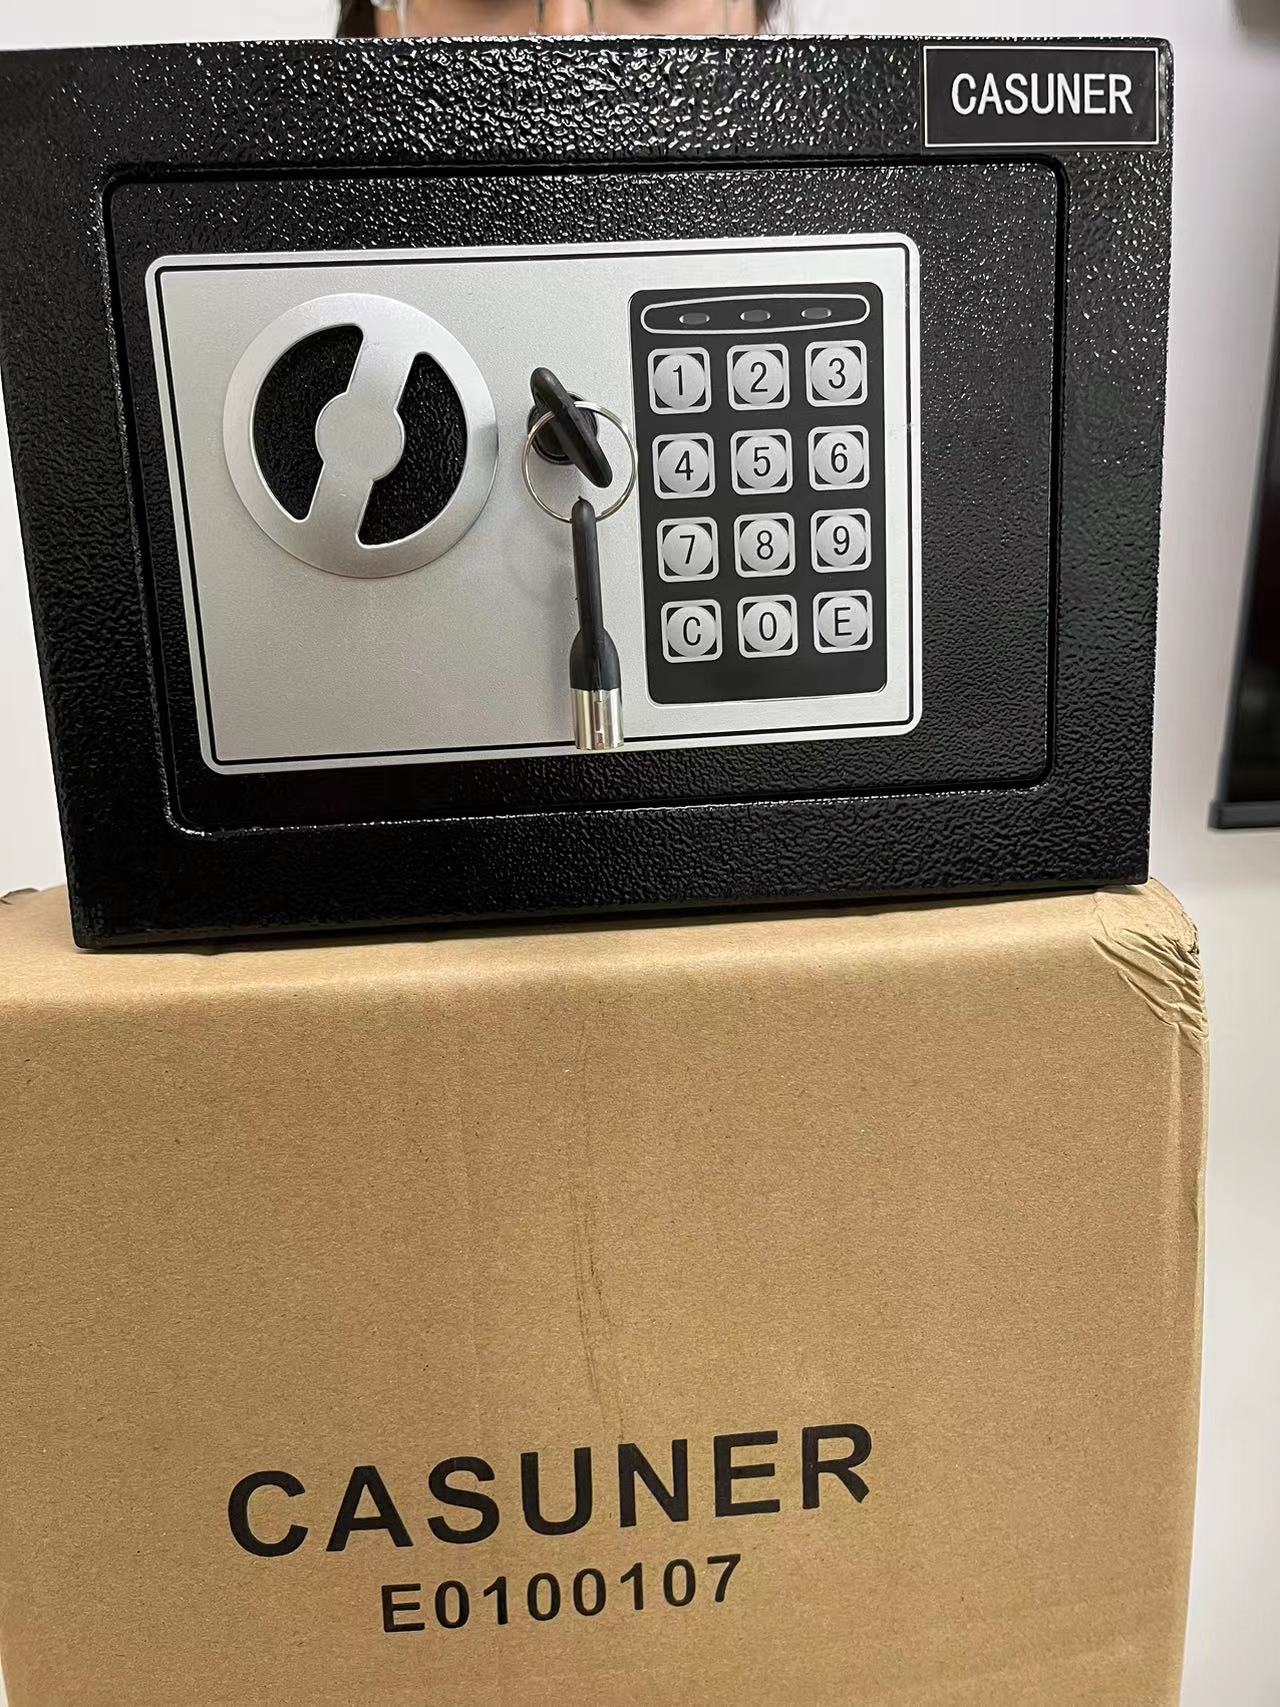 CASUNER - Electronic Safe Box with Keypad & Keys, Money Lock Boxes, Safety Boxes for Home, Office, Hotel Rooms,Business, Jewelry, Gun, Cash, Steel Alloy Drop Safe 9.1" x 6.7" x 6.7''